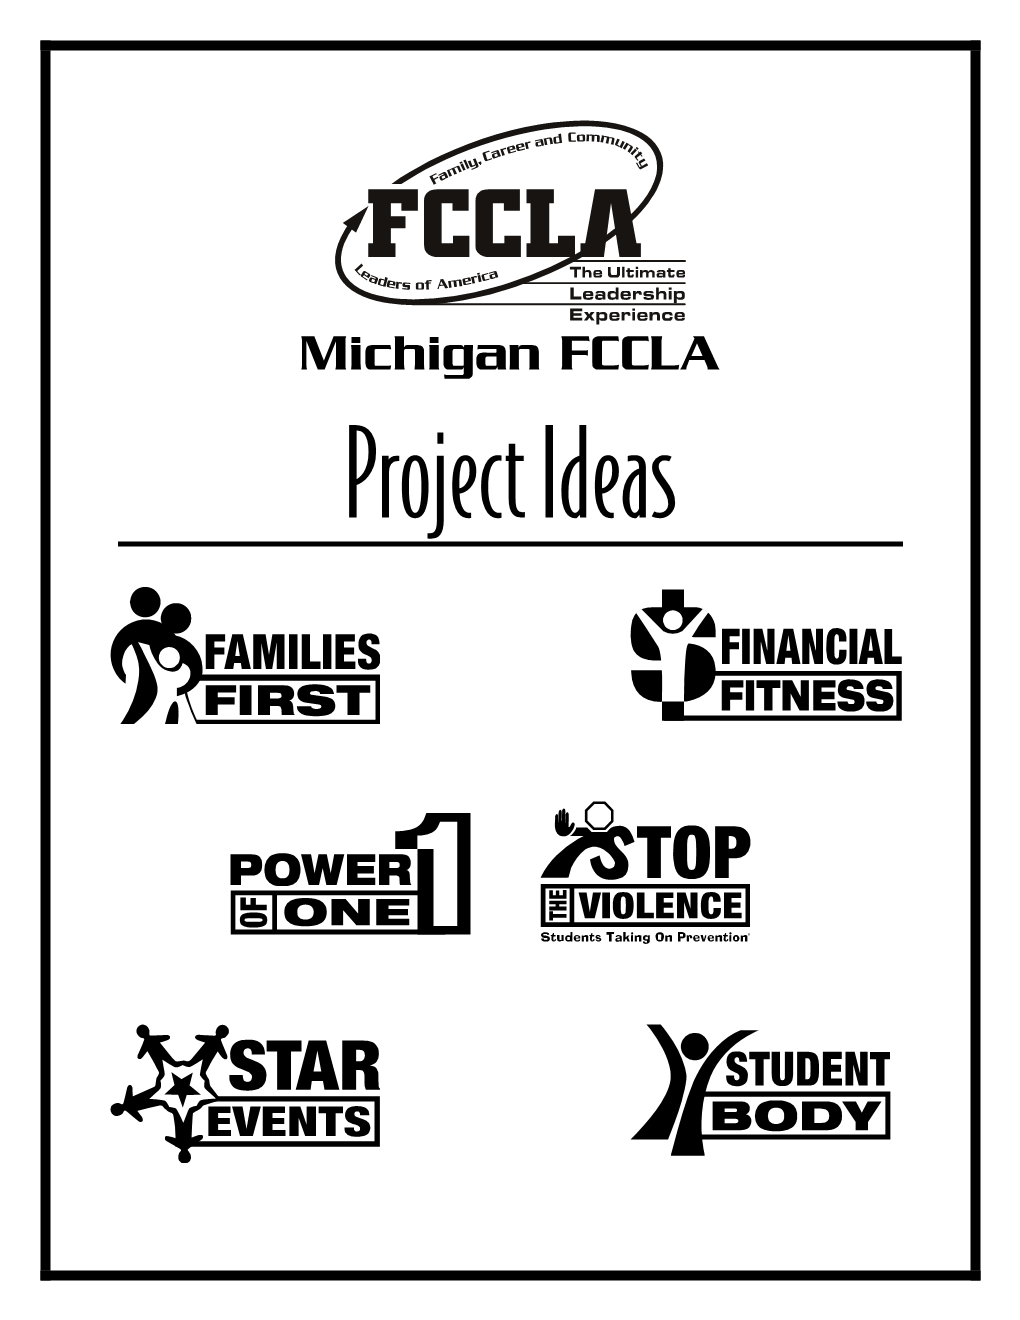 Families First Project Ideas